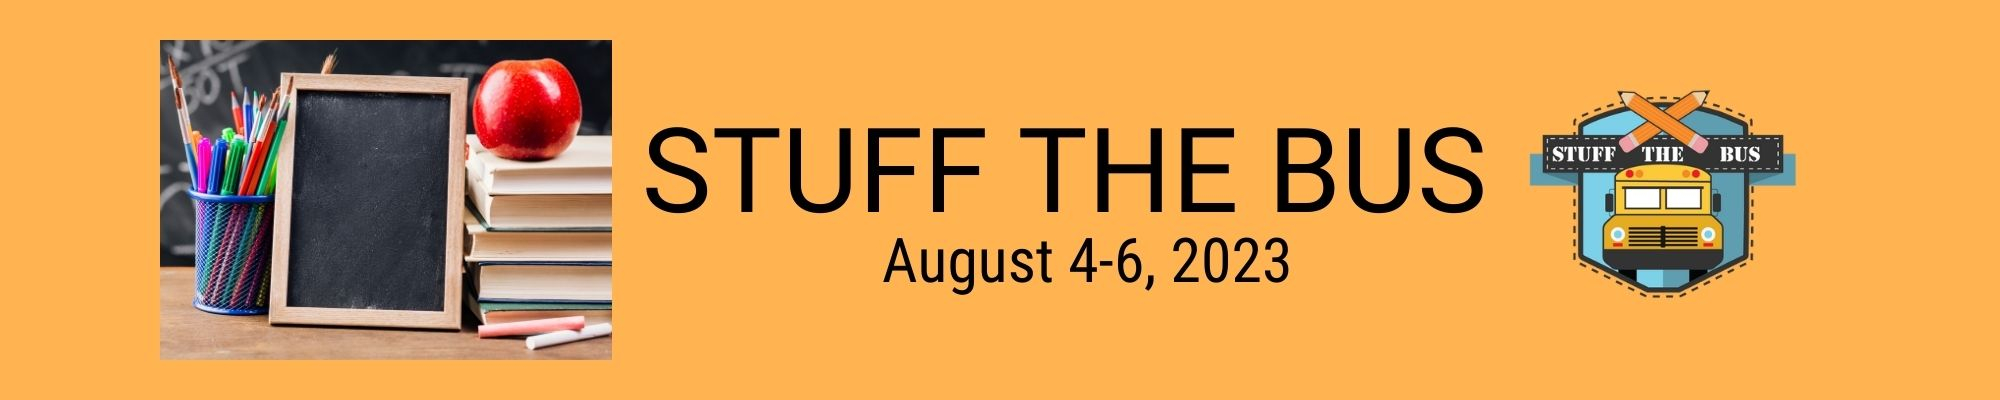 Stuff the Bus August 4-6, 2023